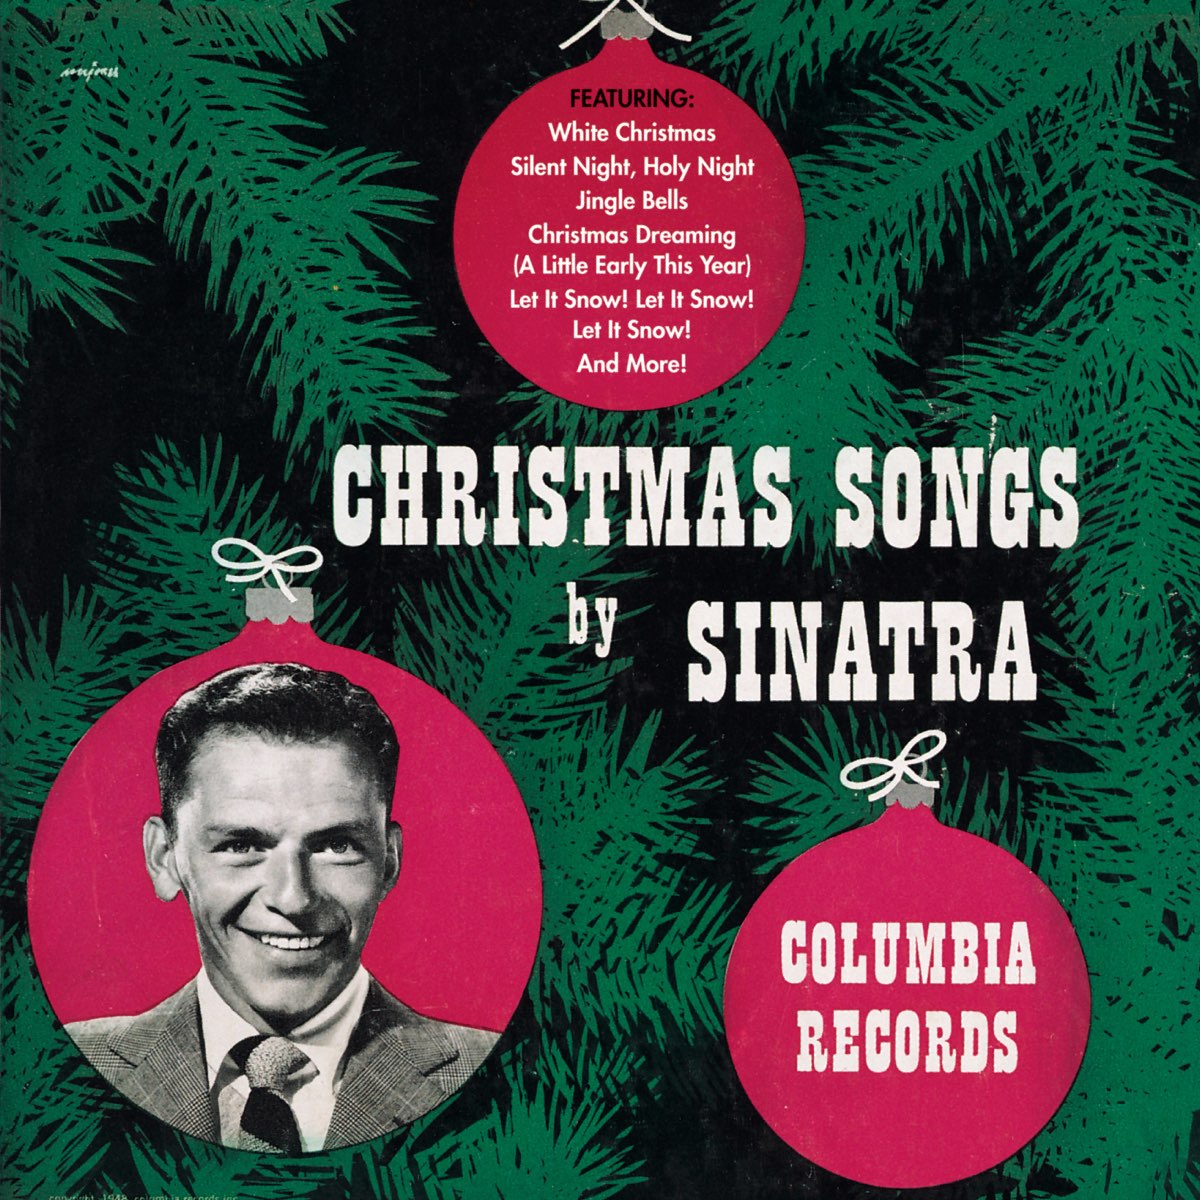 Christmas Songs by Sinatra - Album by Frank Sinatra - Apple Music